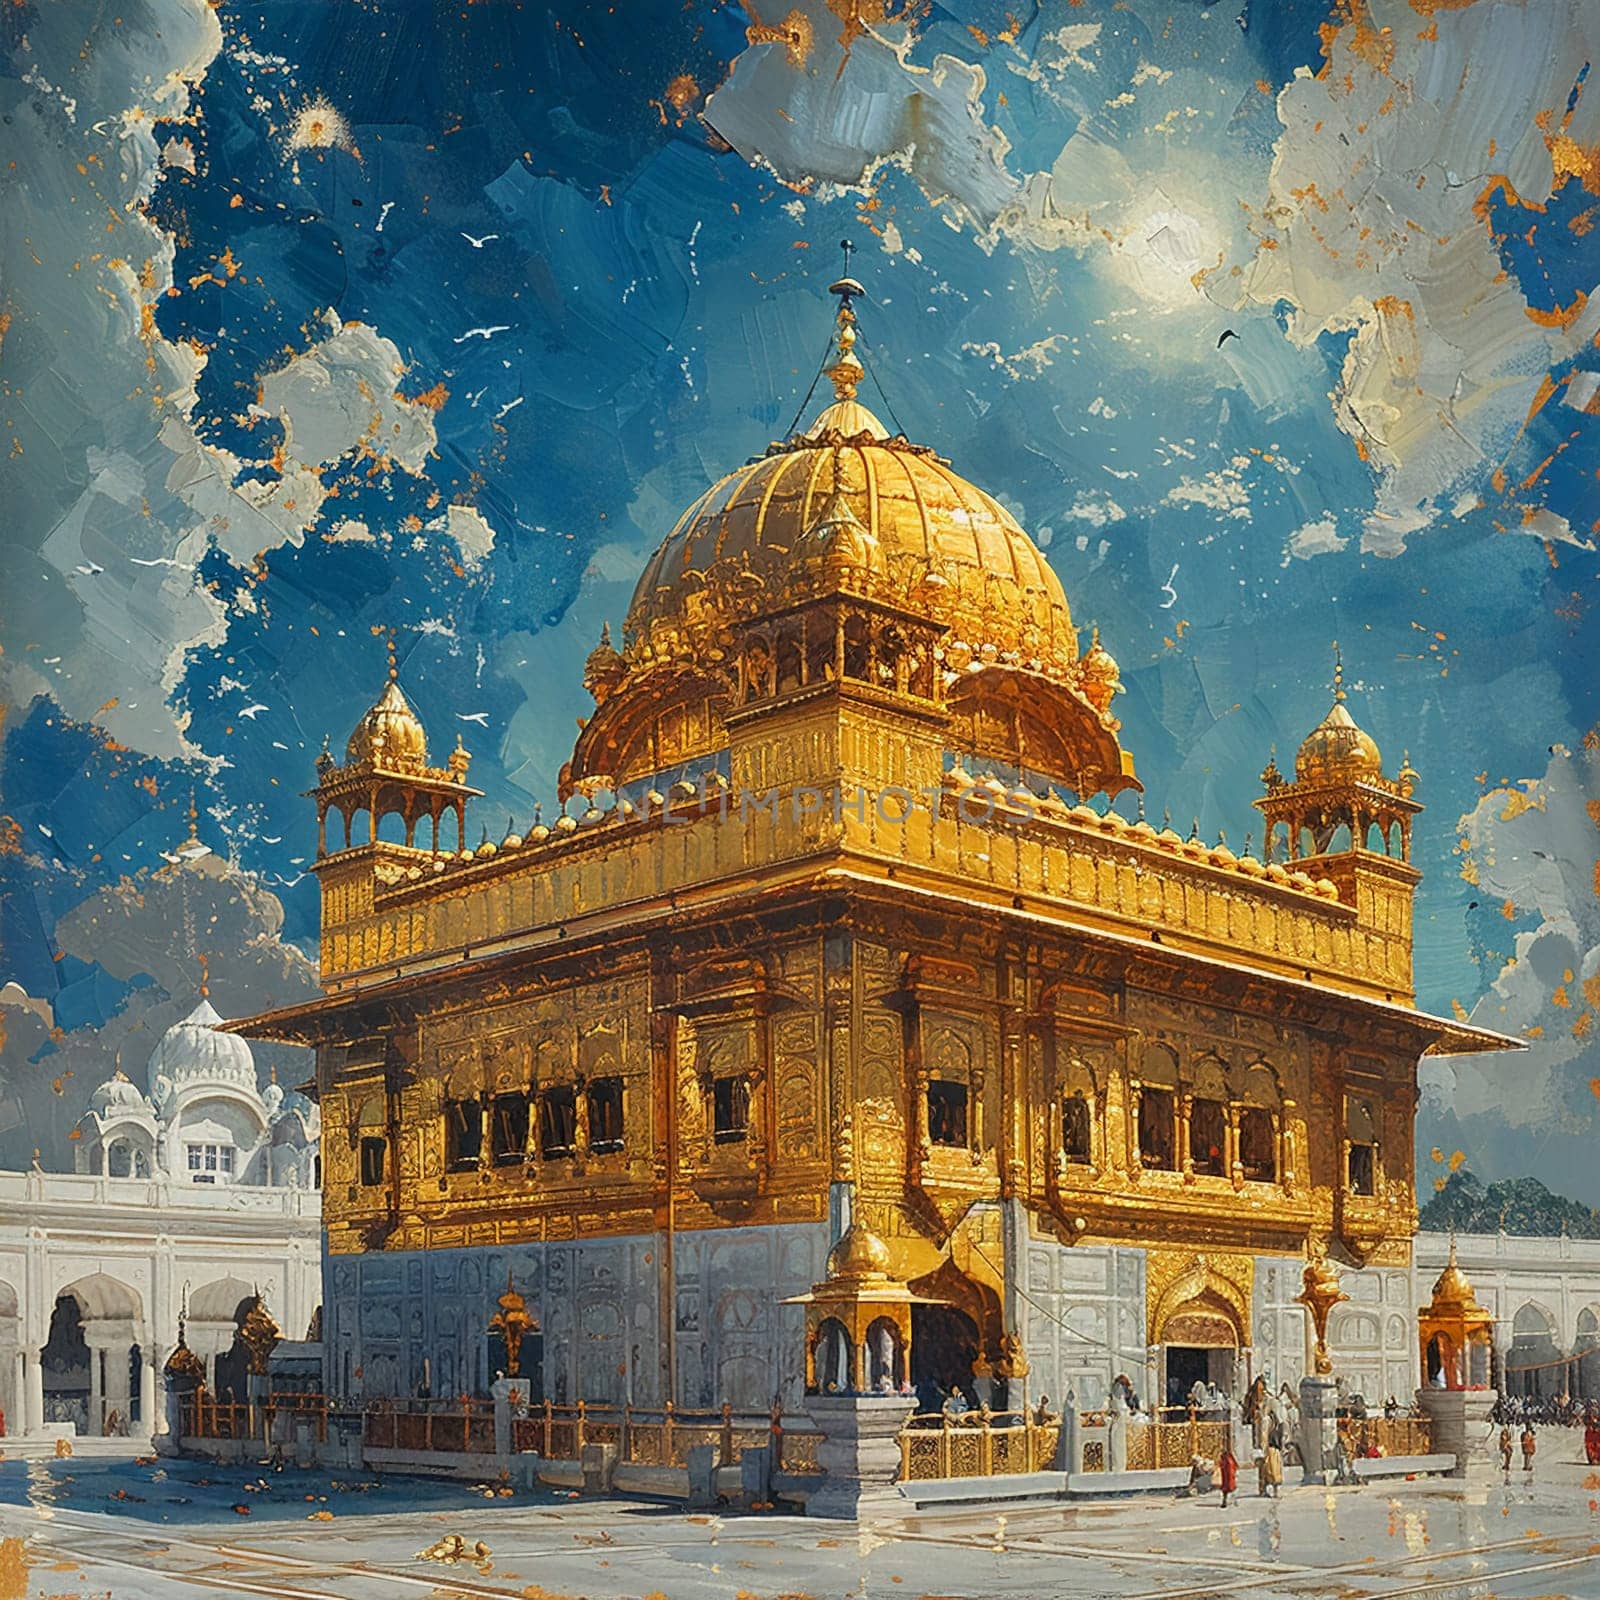 Golden Temple Dome Shining Under the Sun, The gleaming curvature stands out as a beacon of devotion and sacred architecture.